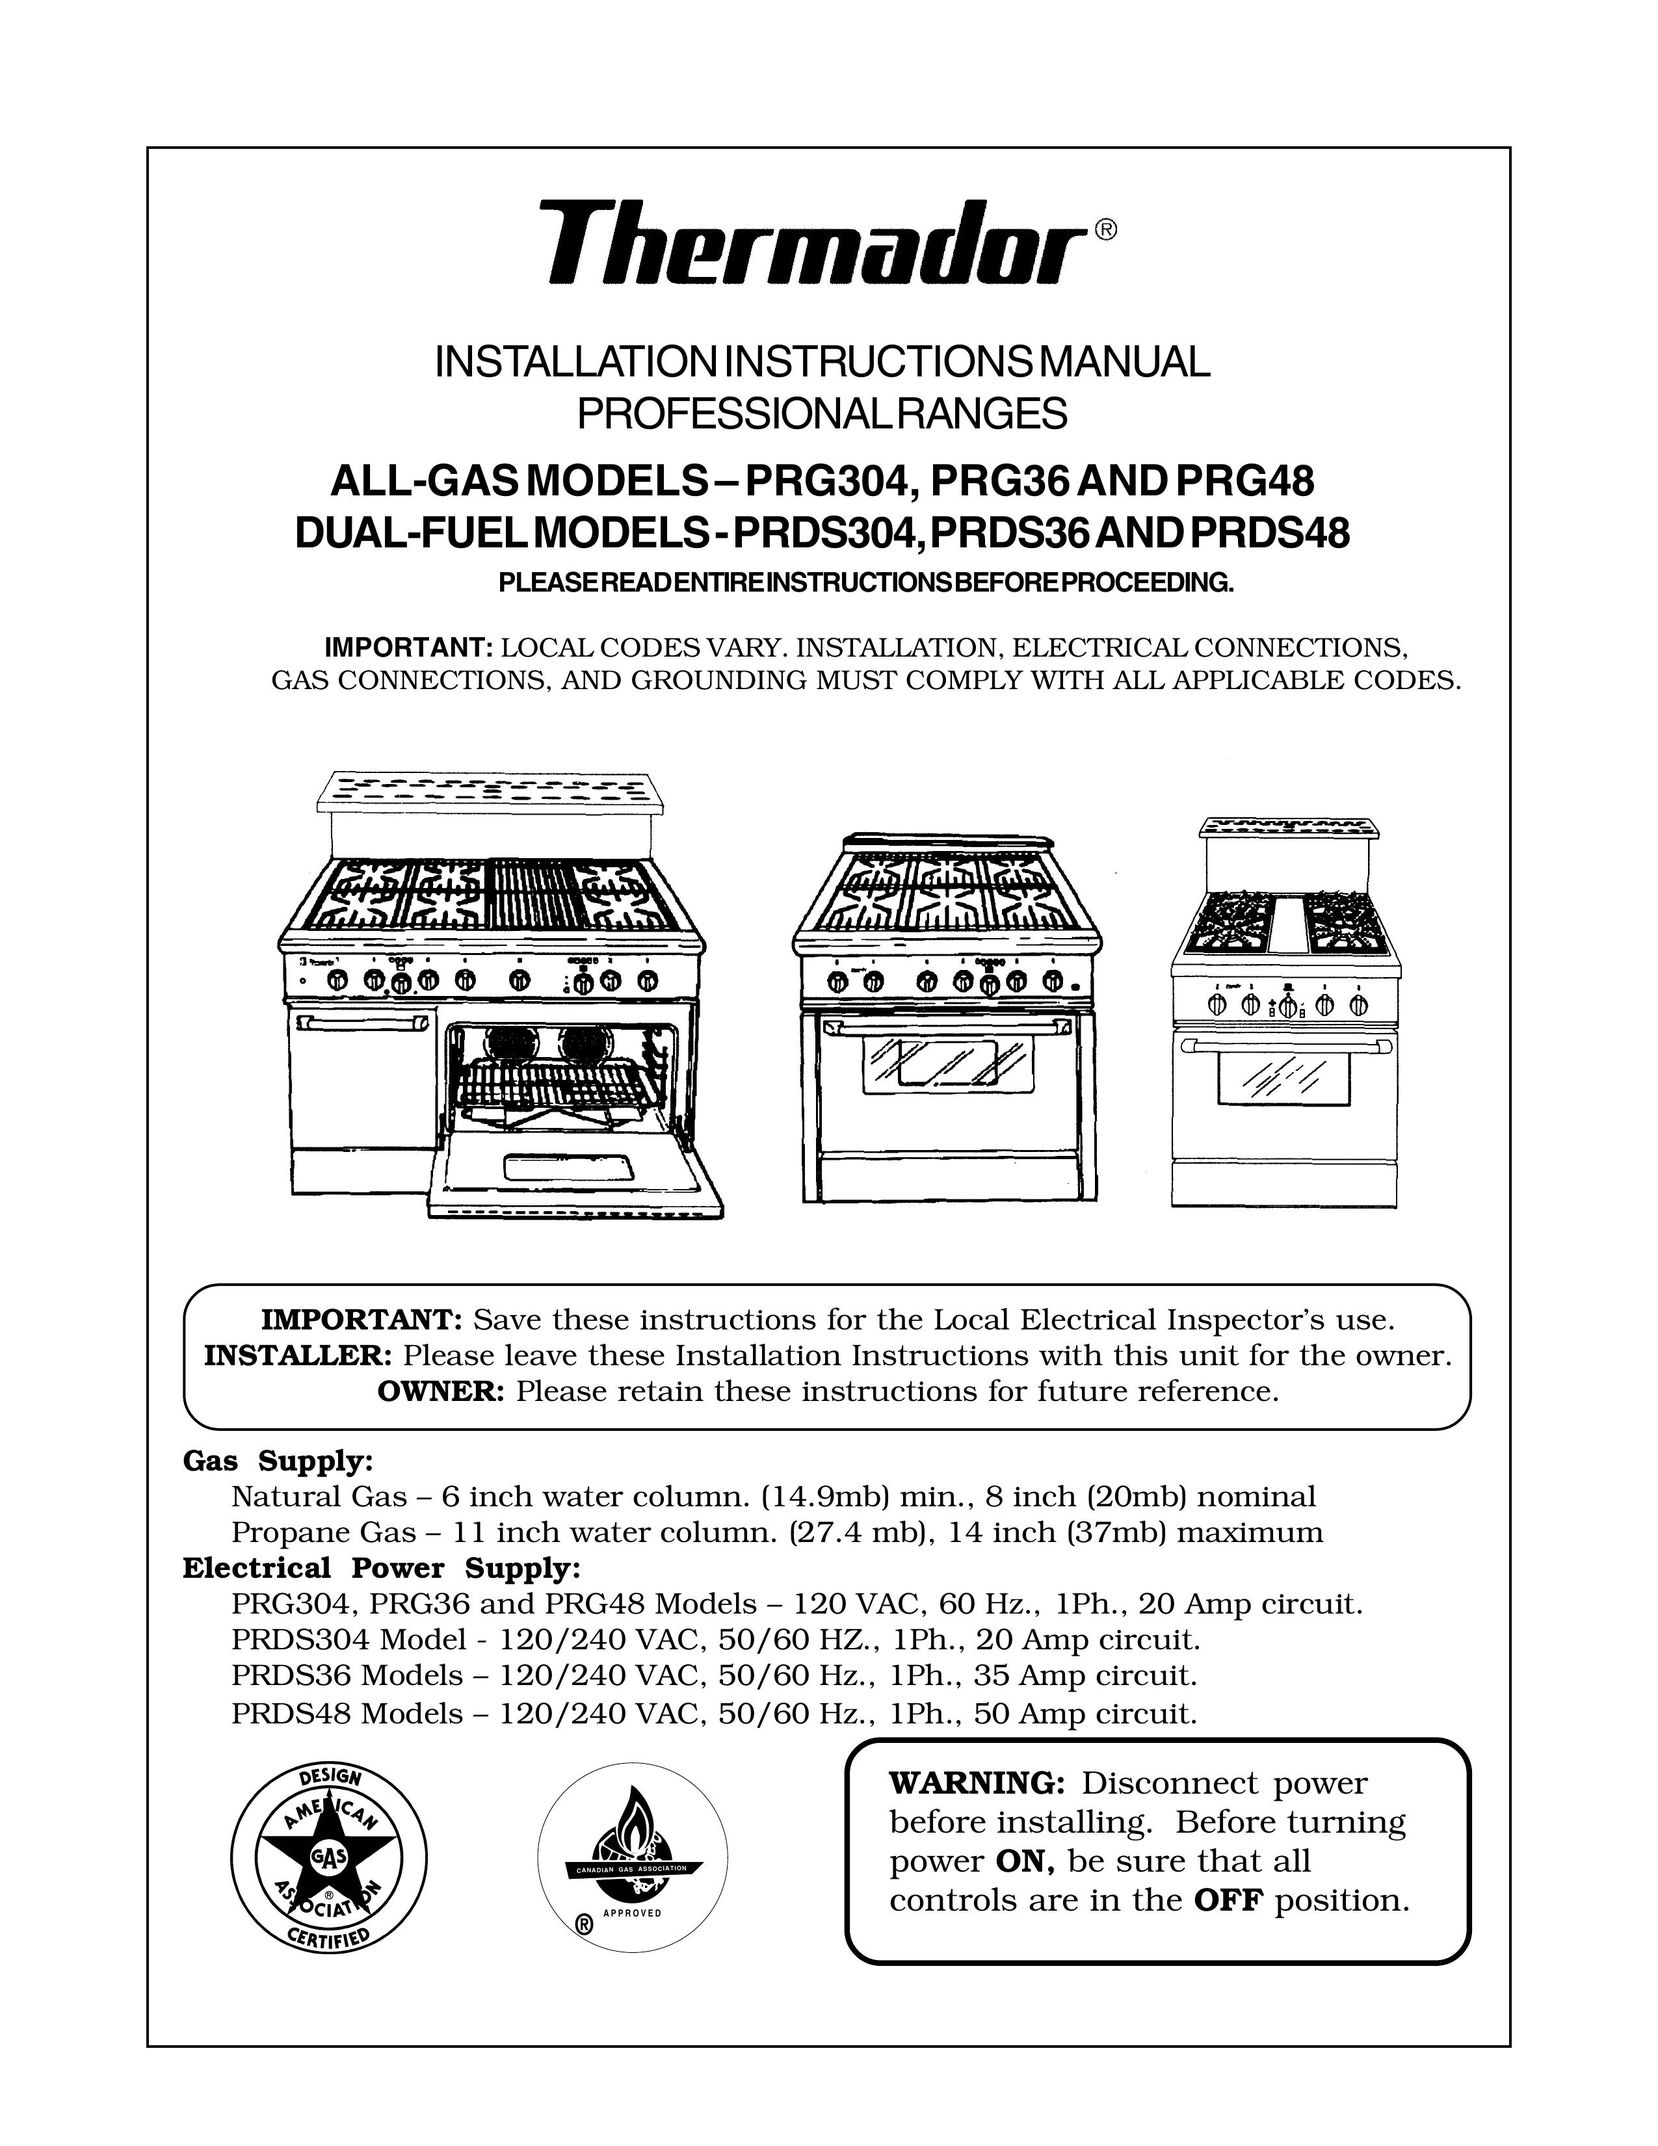 Thermador PRDS48 Double Oven User Manual